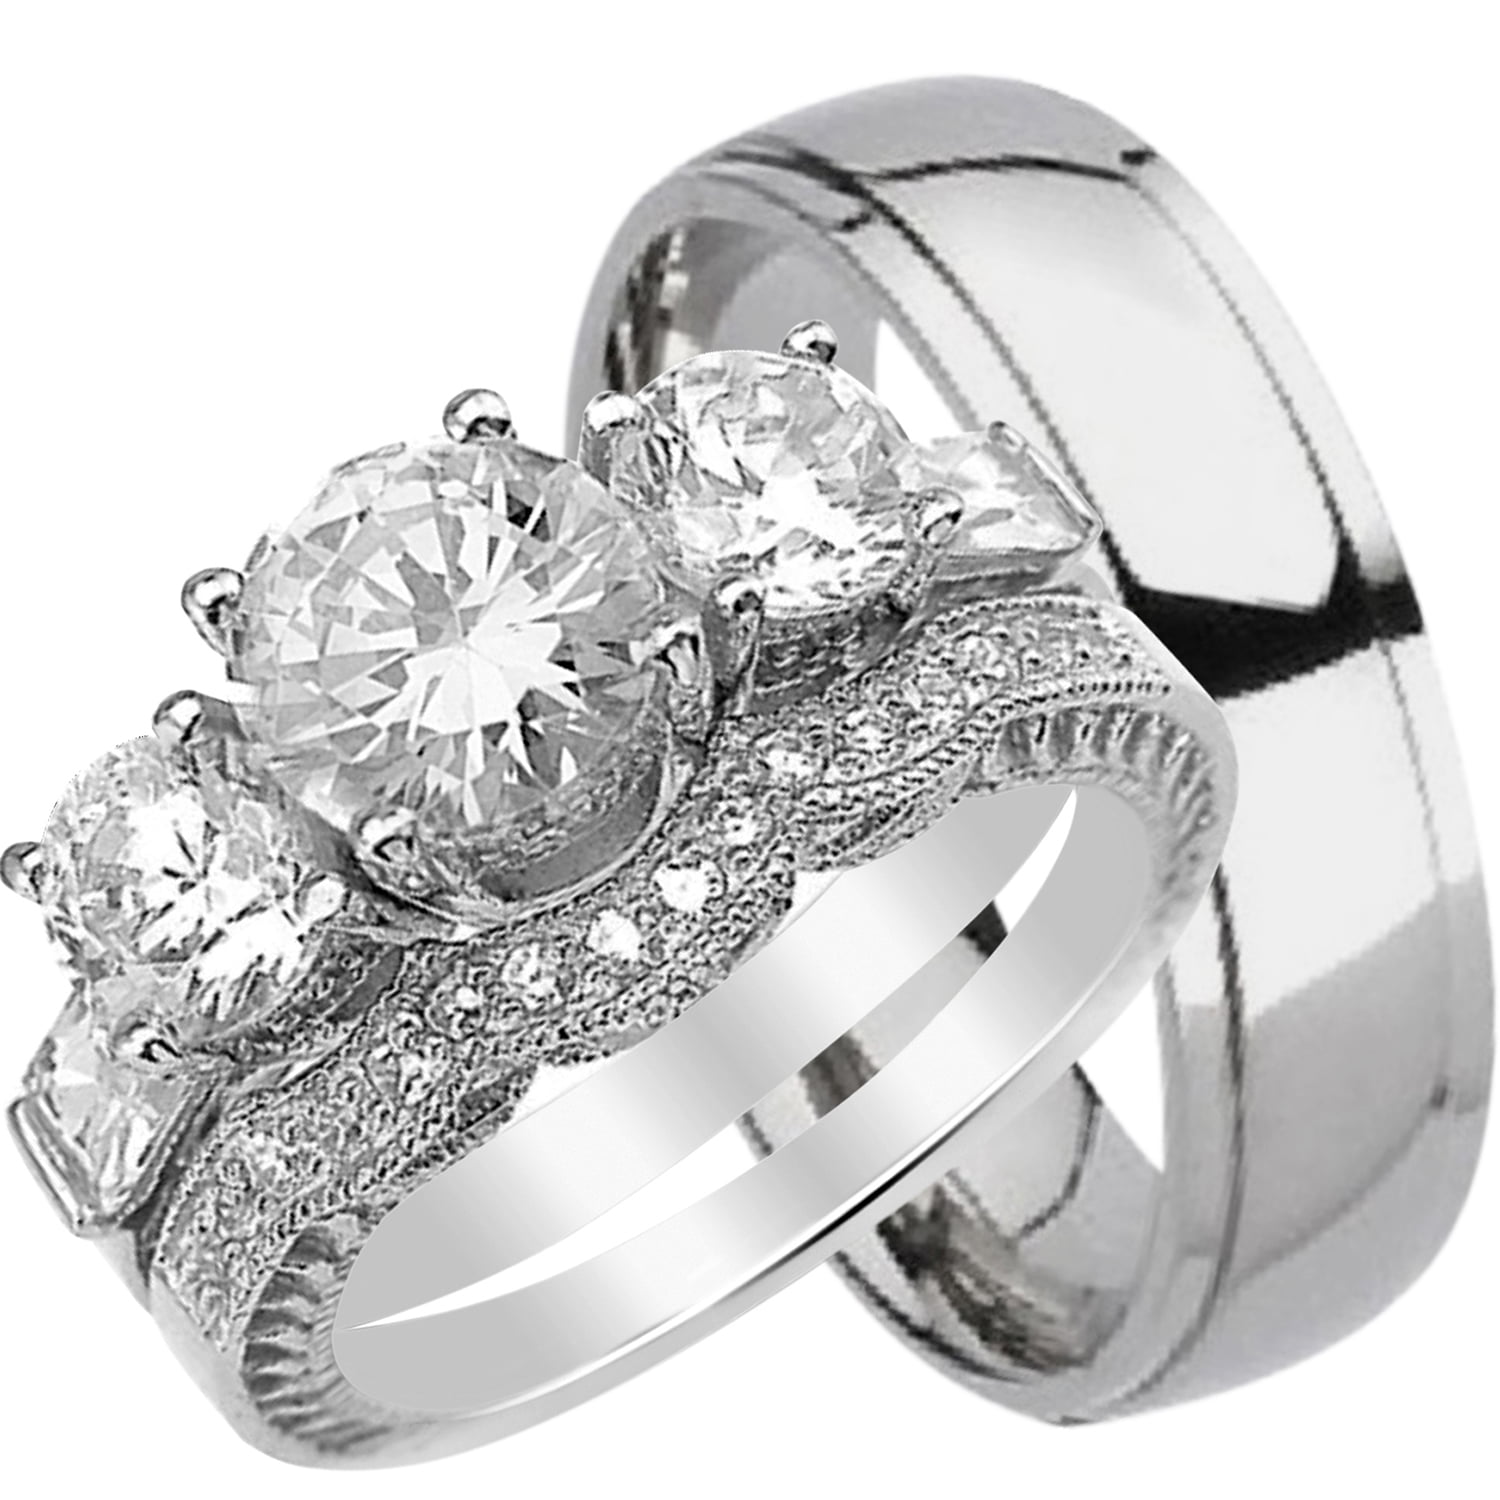 TVS-JEWELS Men and Women Couple His and Hers Trio Ring Bridal Matching Engagement Wedding Ring Band Set